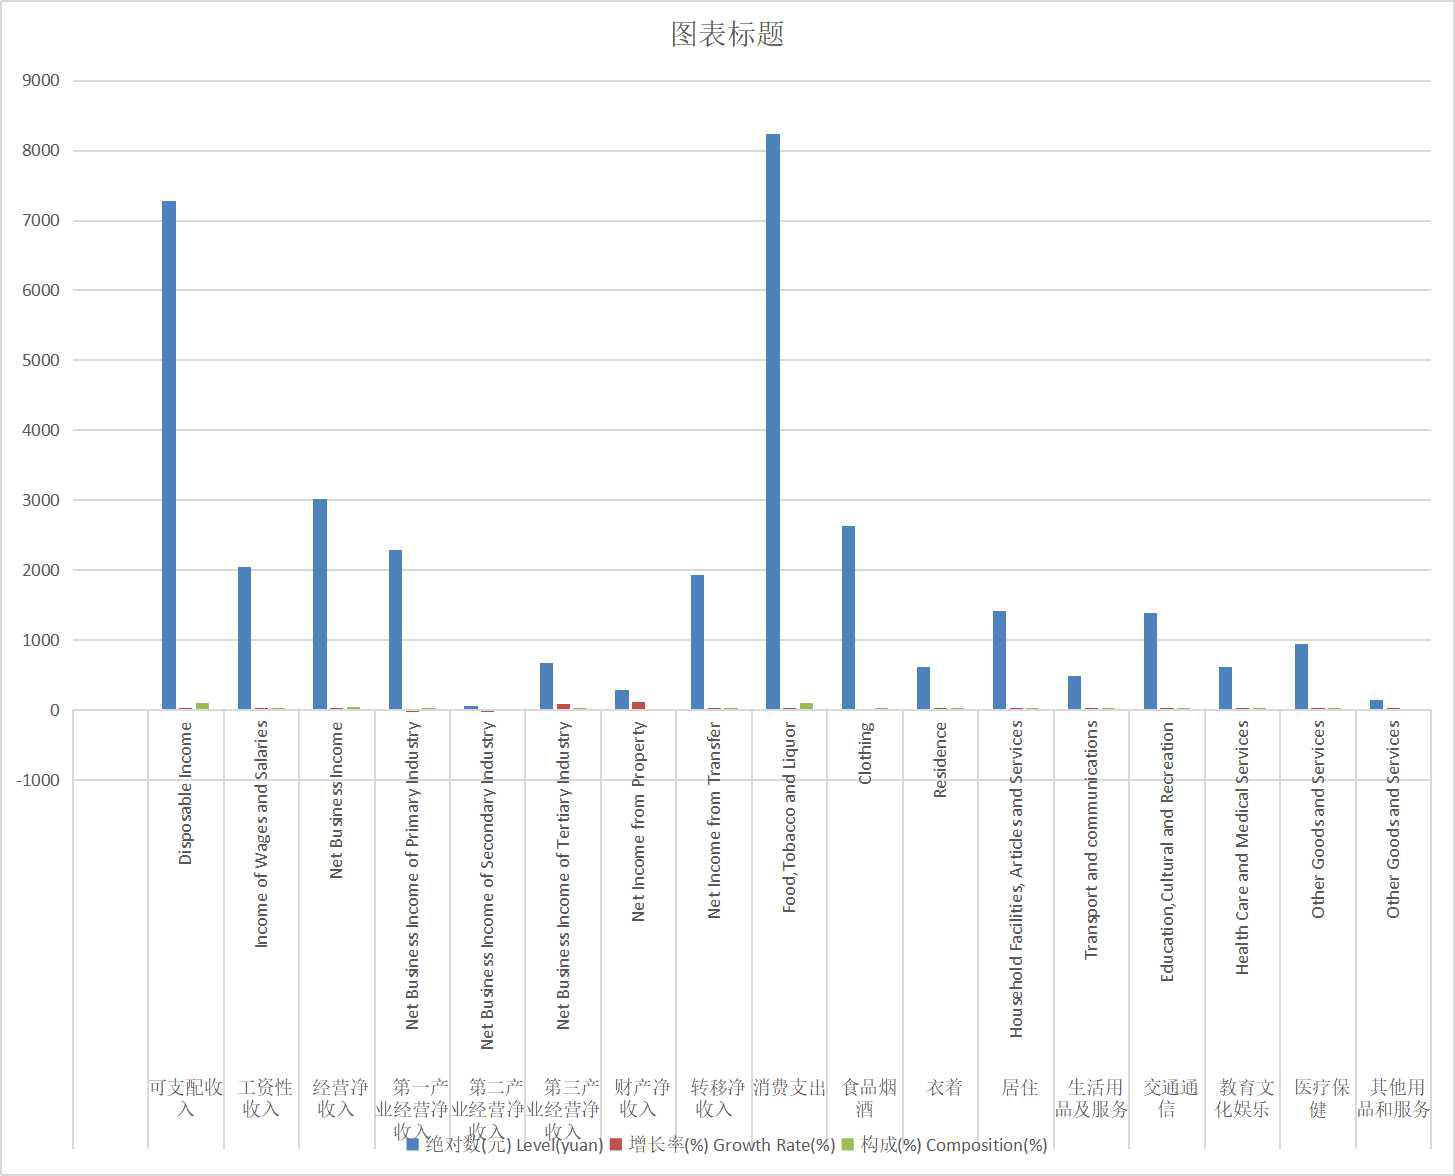 Per capita income and expenditure of rural permanent residents in Qinghai Province (2014-2020)